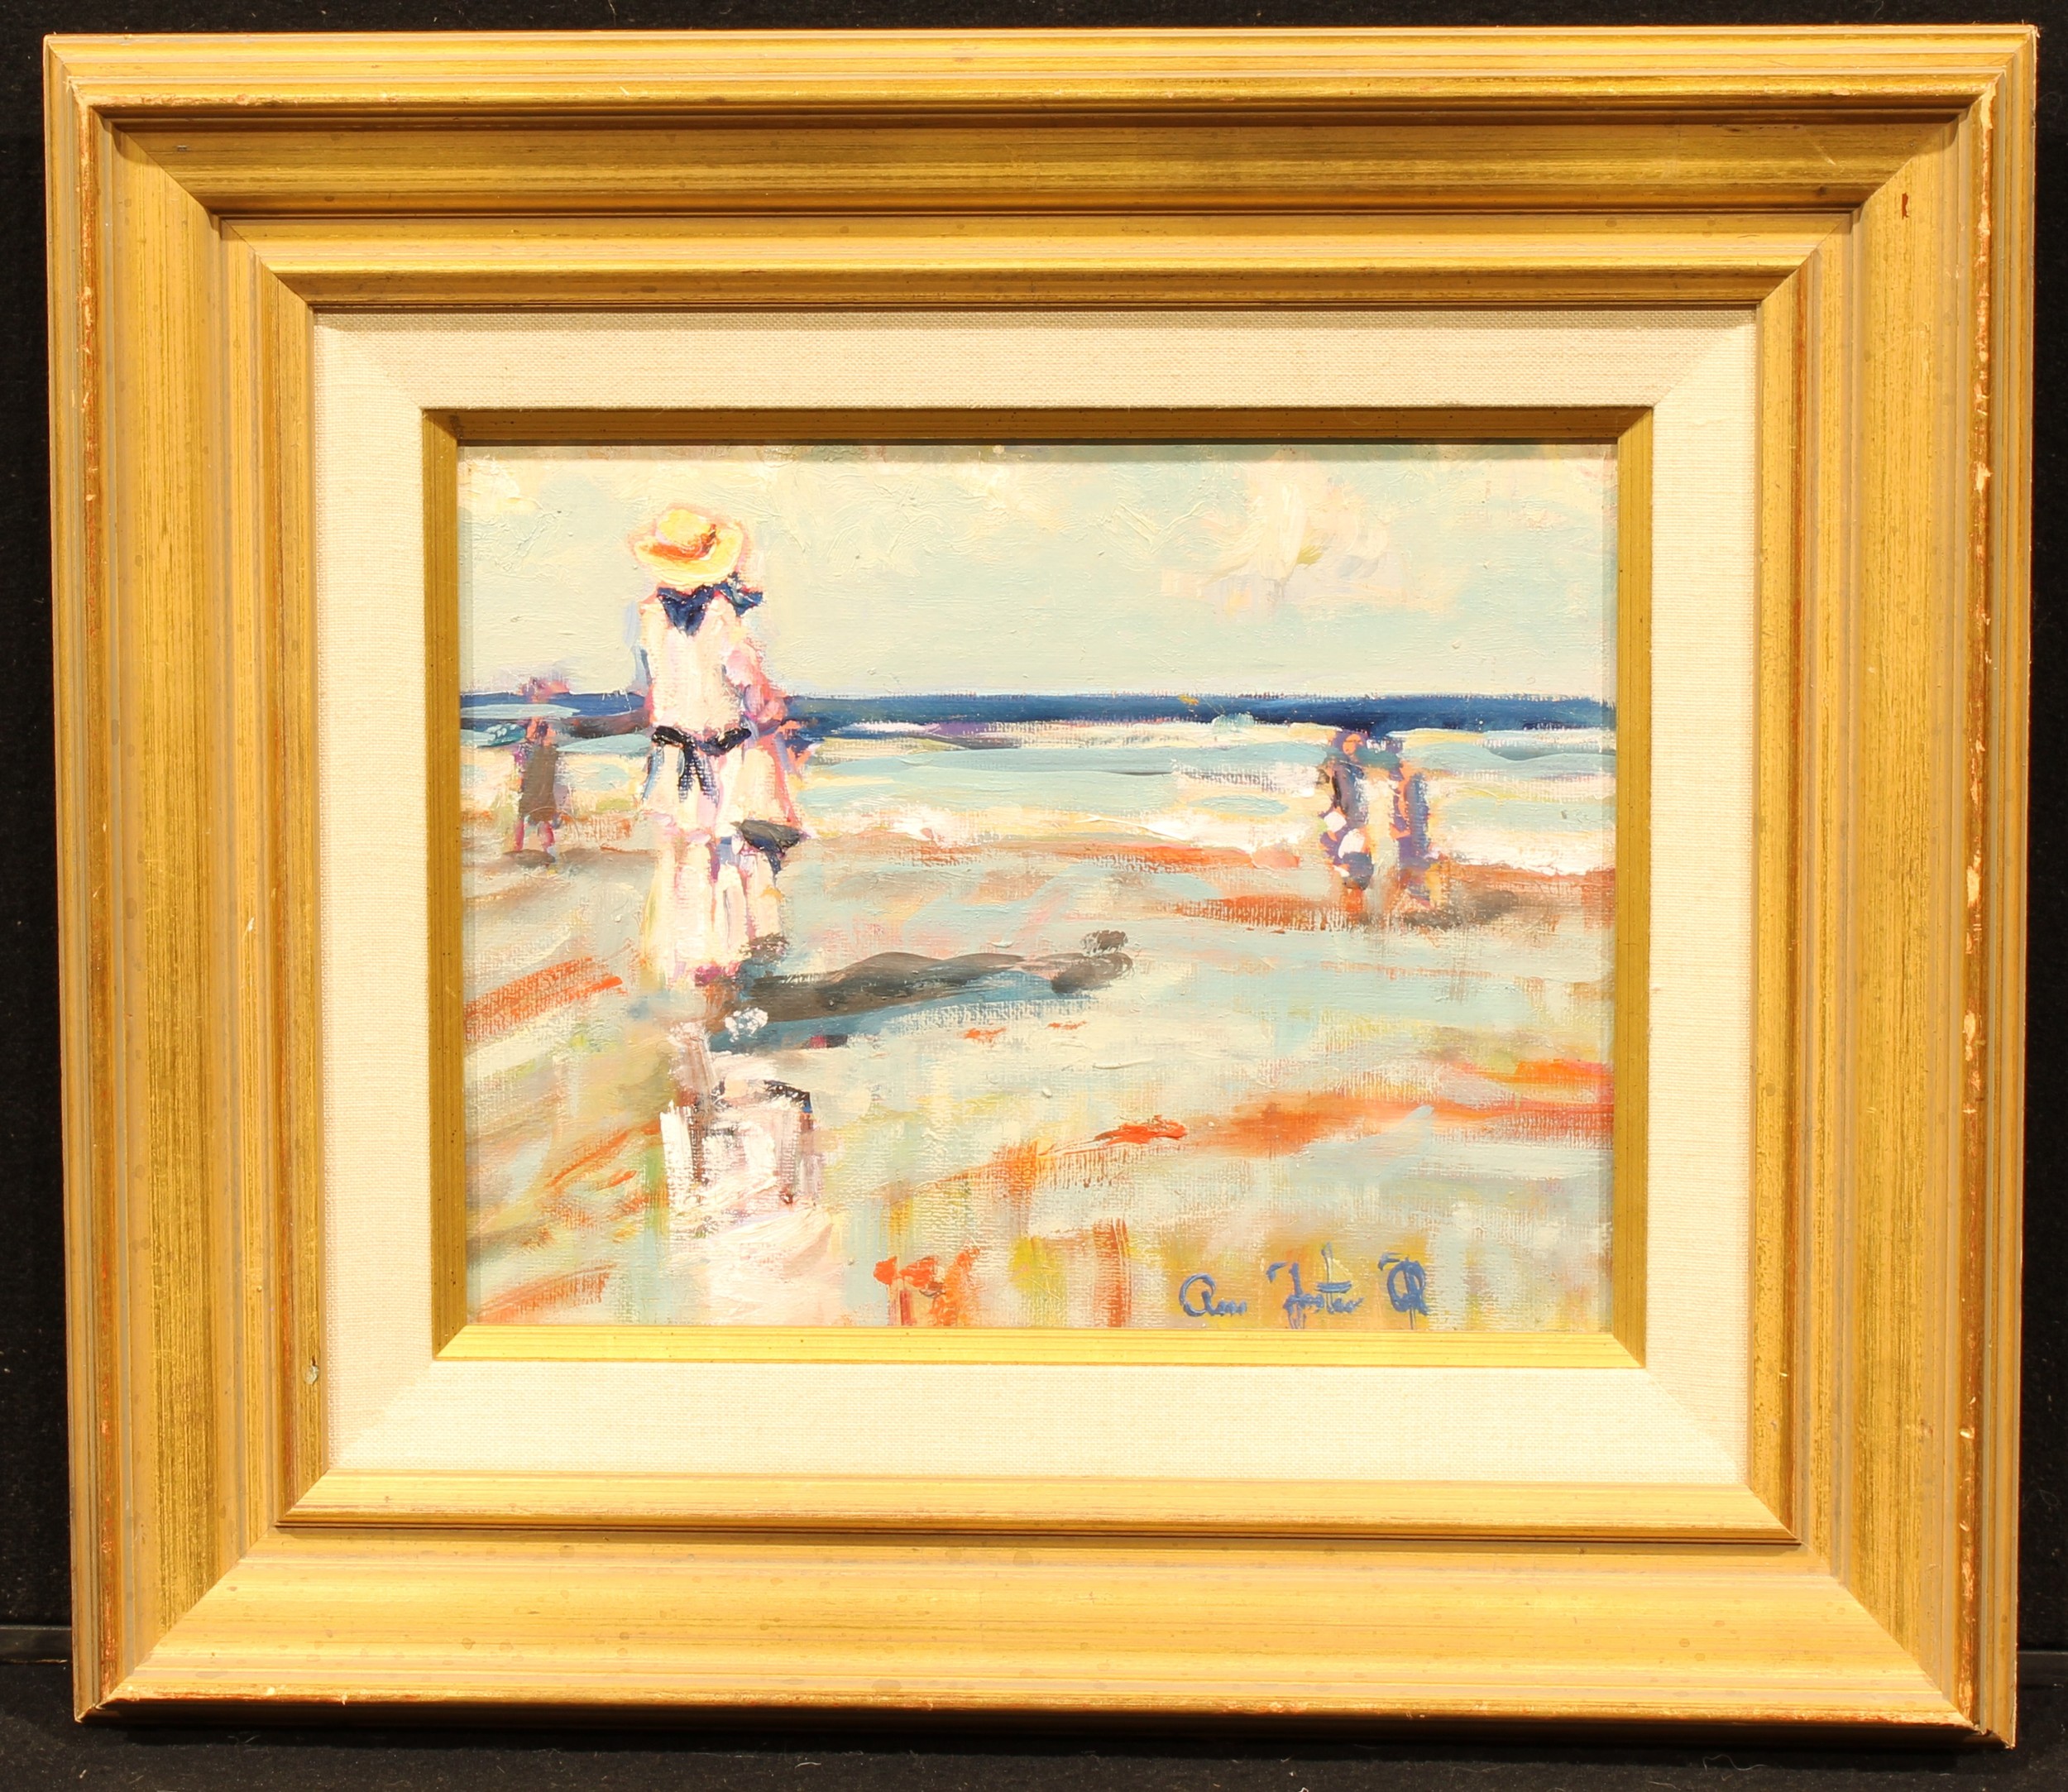 Ross Foster (contemporary British school) At the Seaside, signed, oil on board, 21cm x 27cm - Image 2 of 4